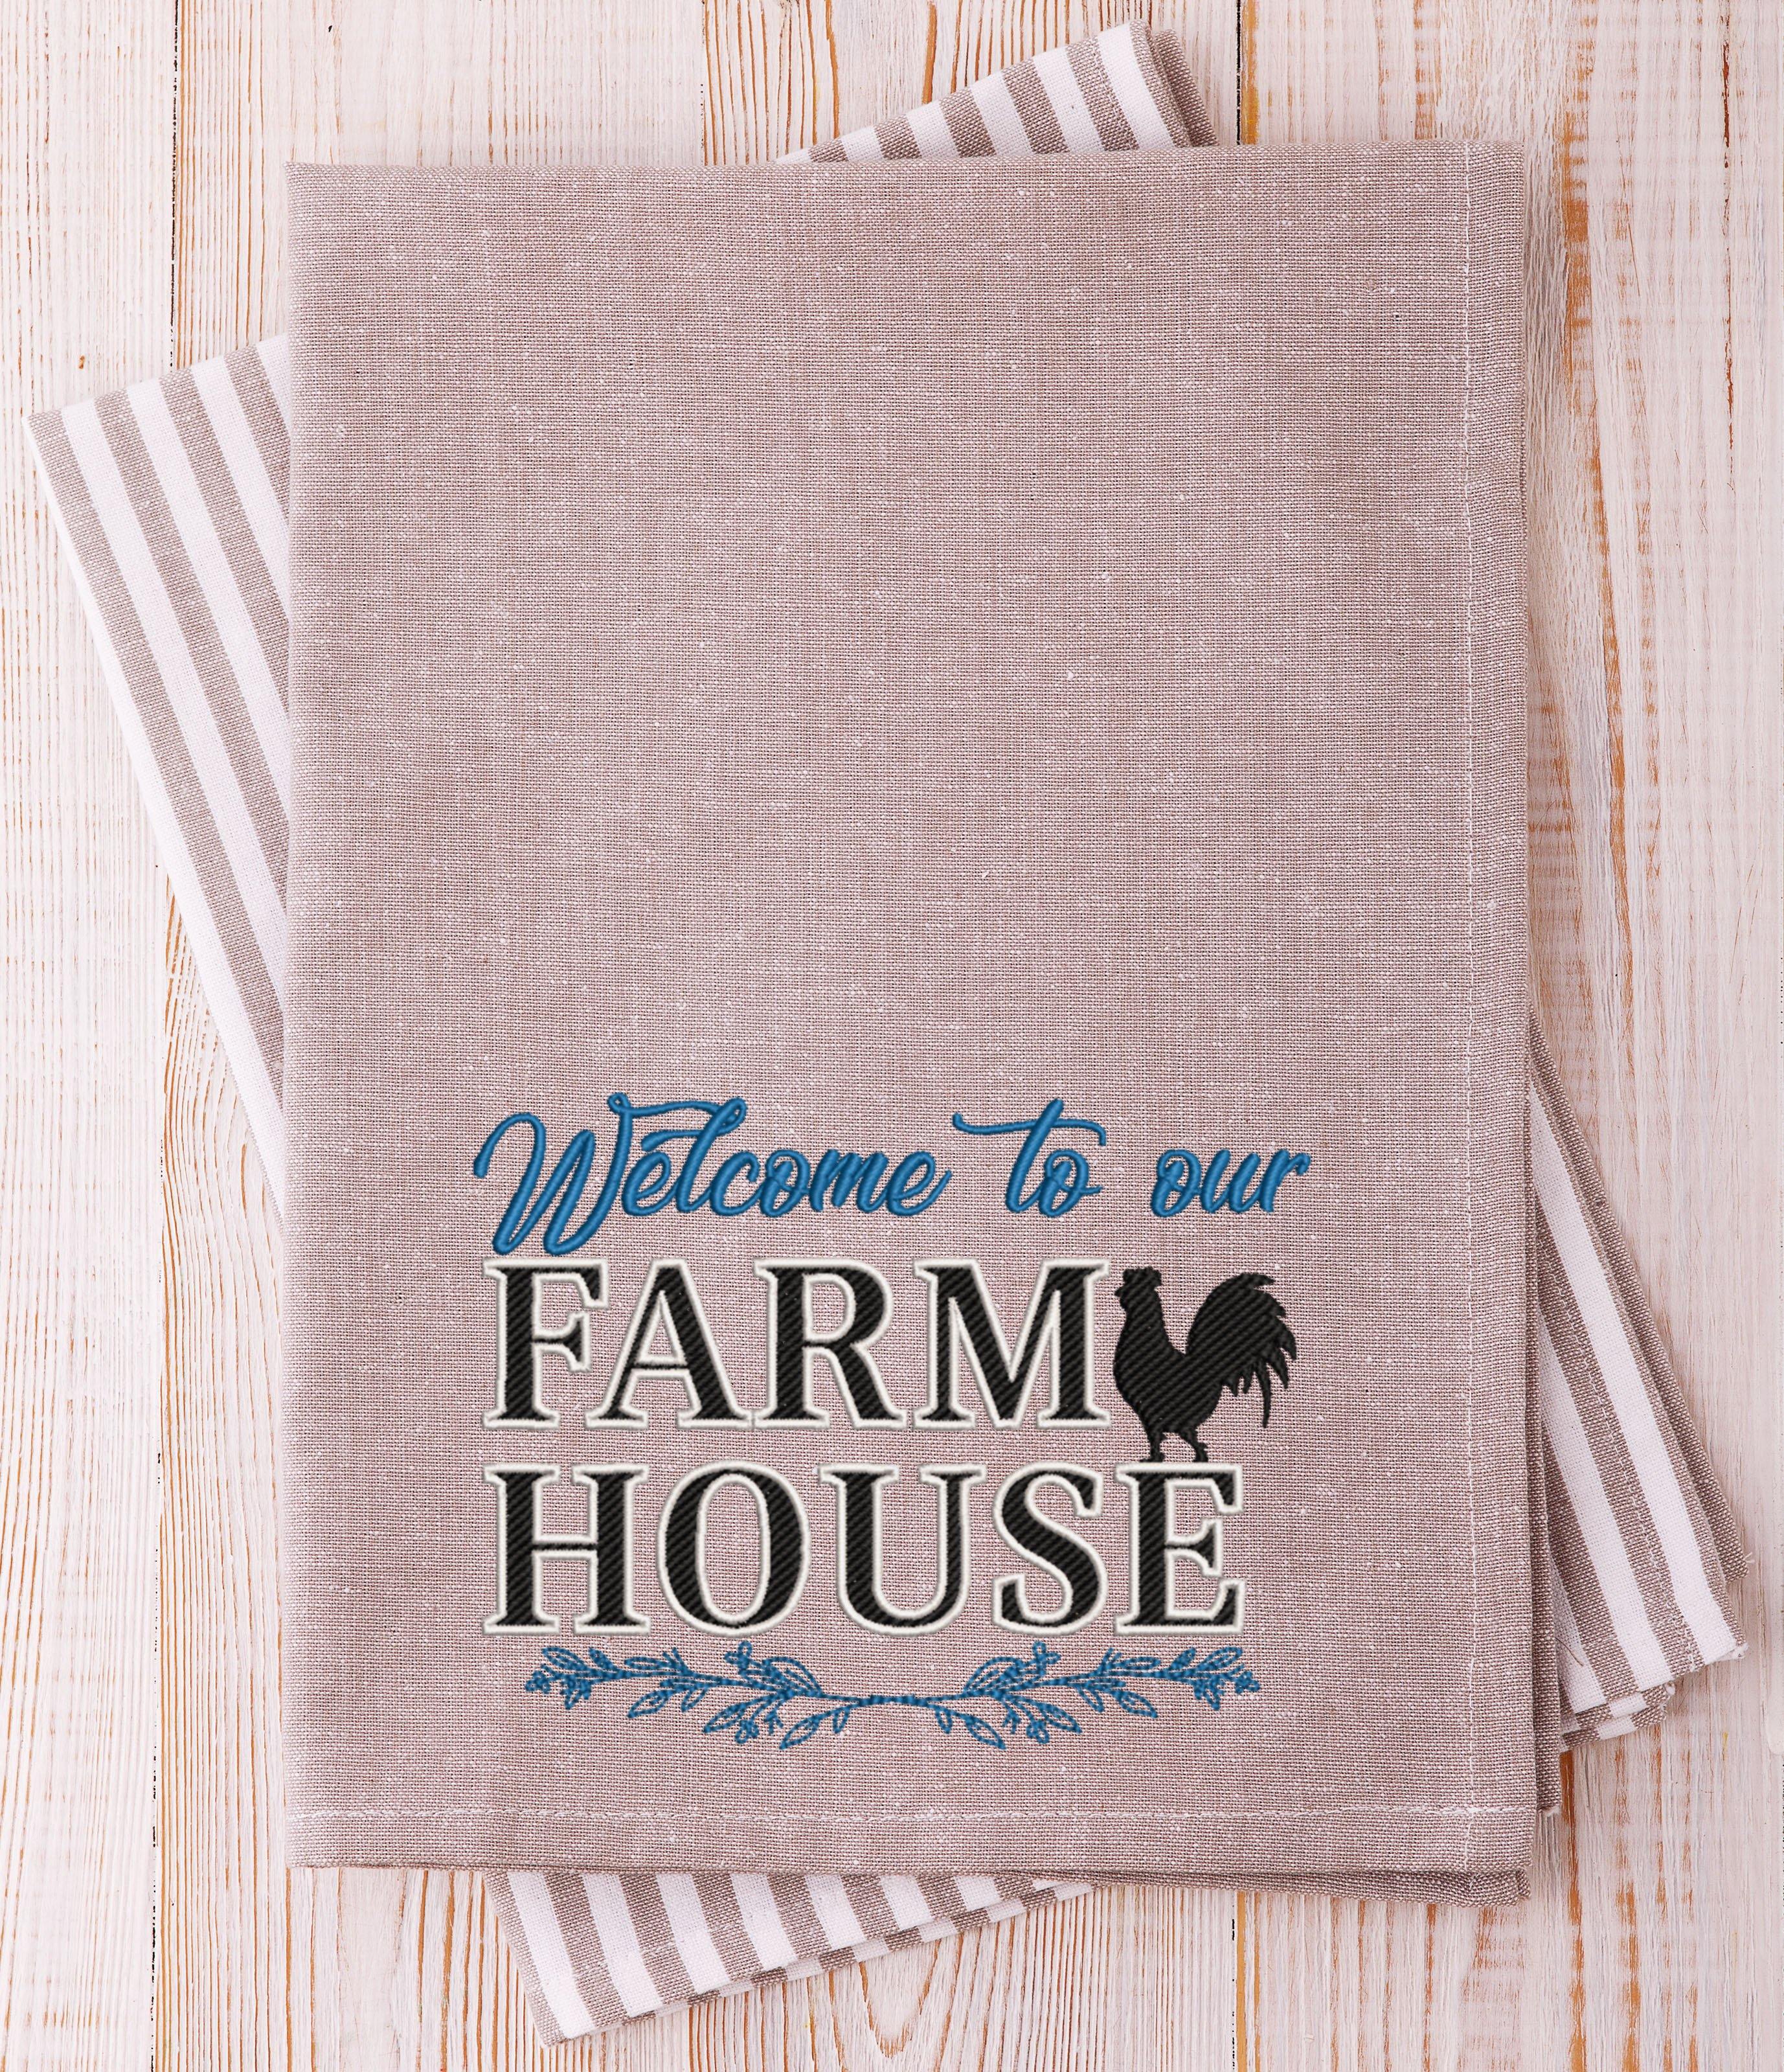 Welcome to our Farm House Embroidery Design - Oh My Crafty Supplies Inc.